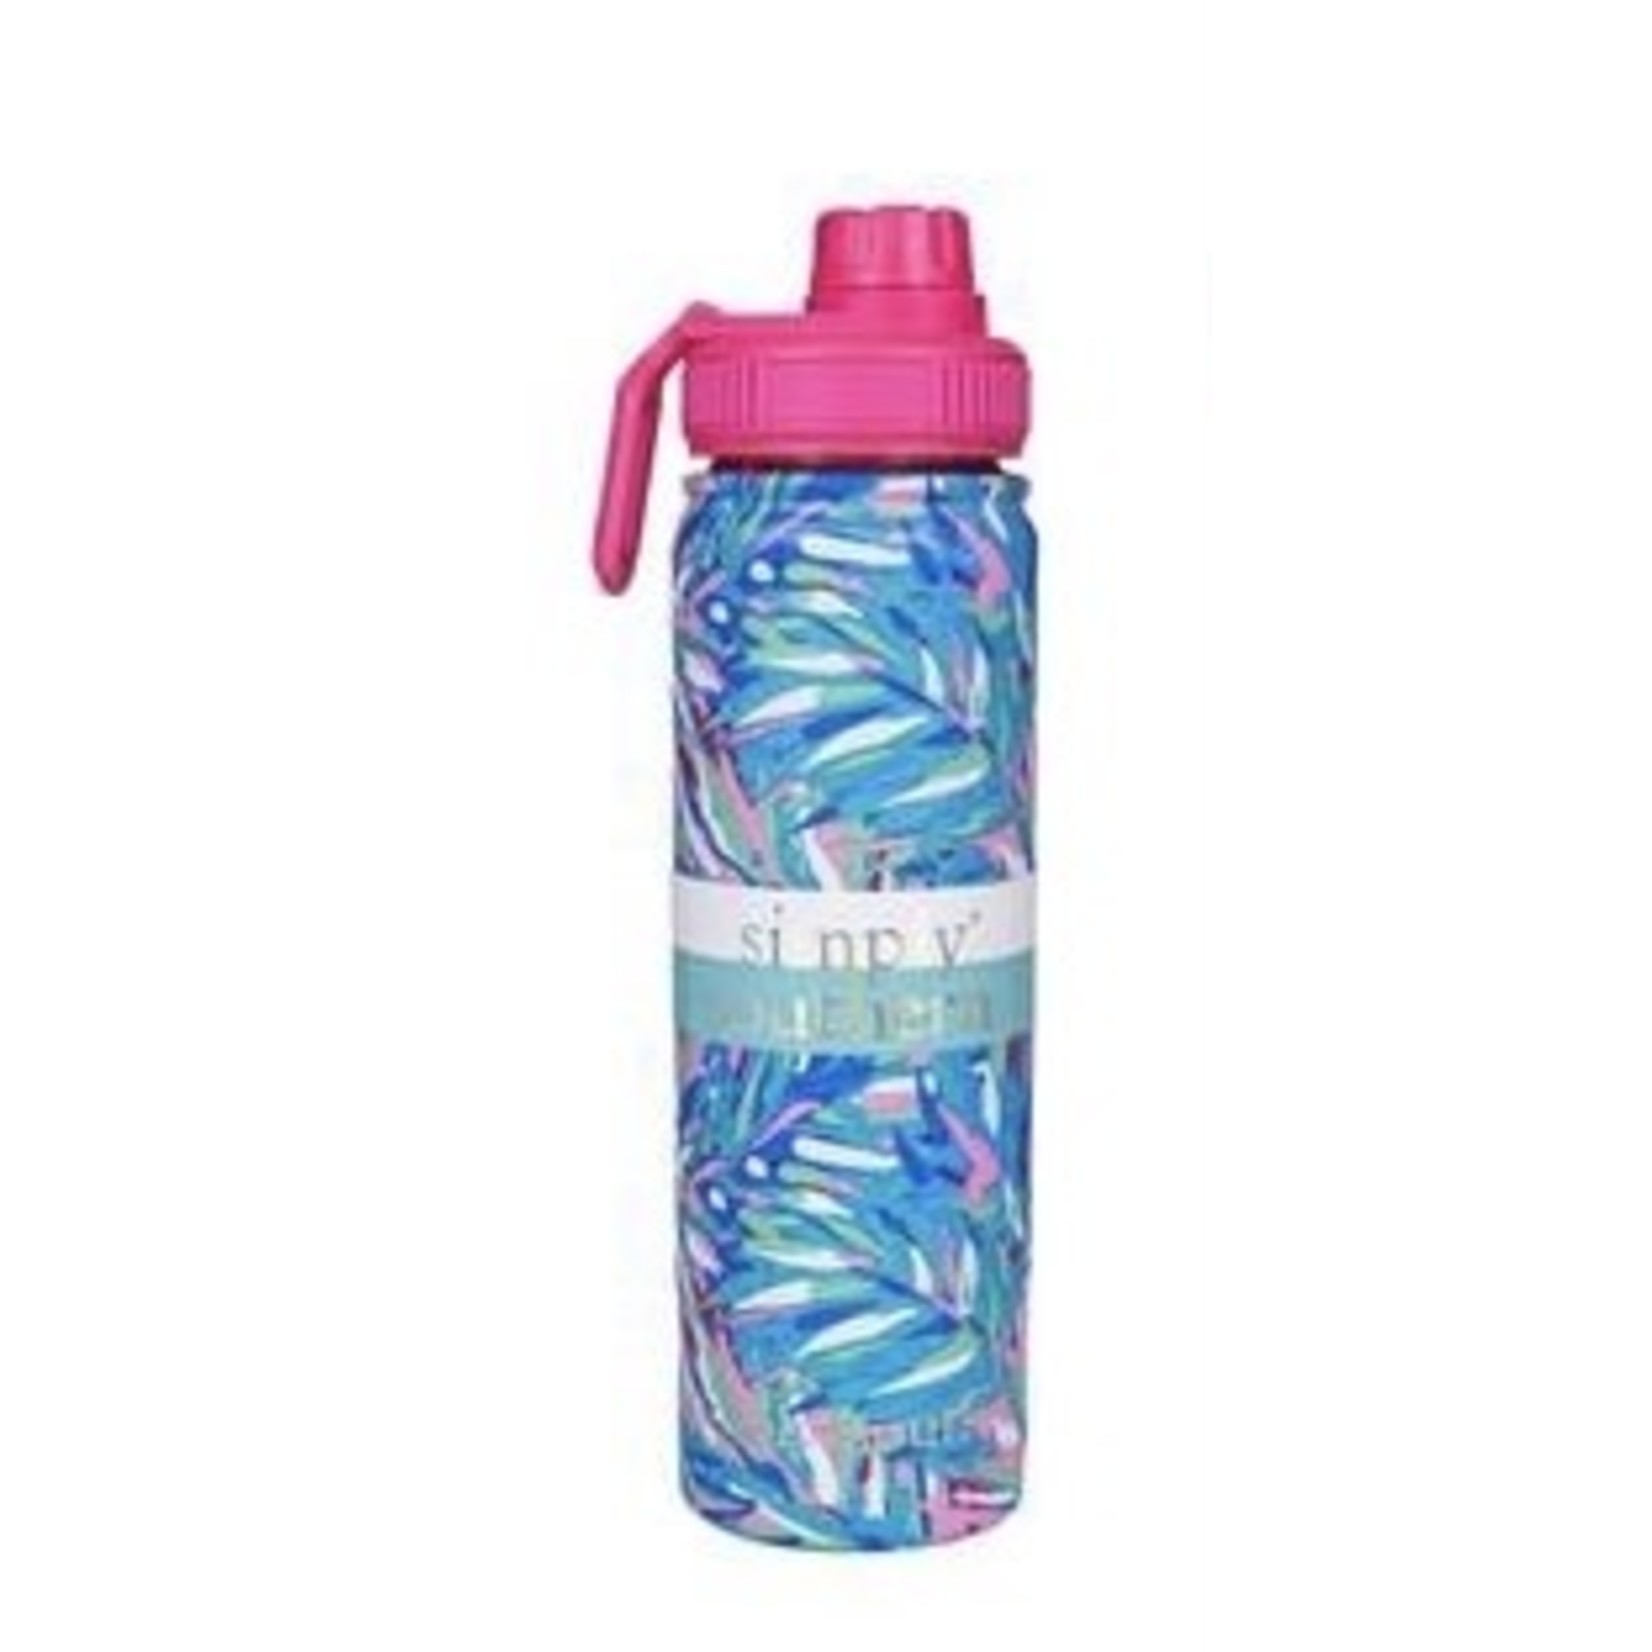 Simply Southern SS Small Water Bottle Tropics